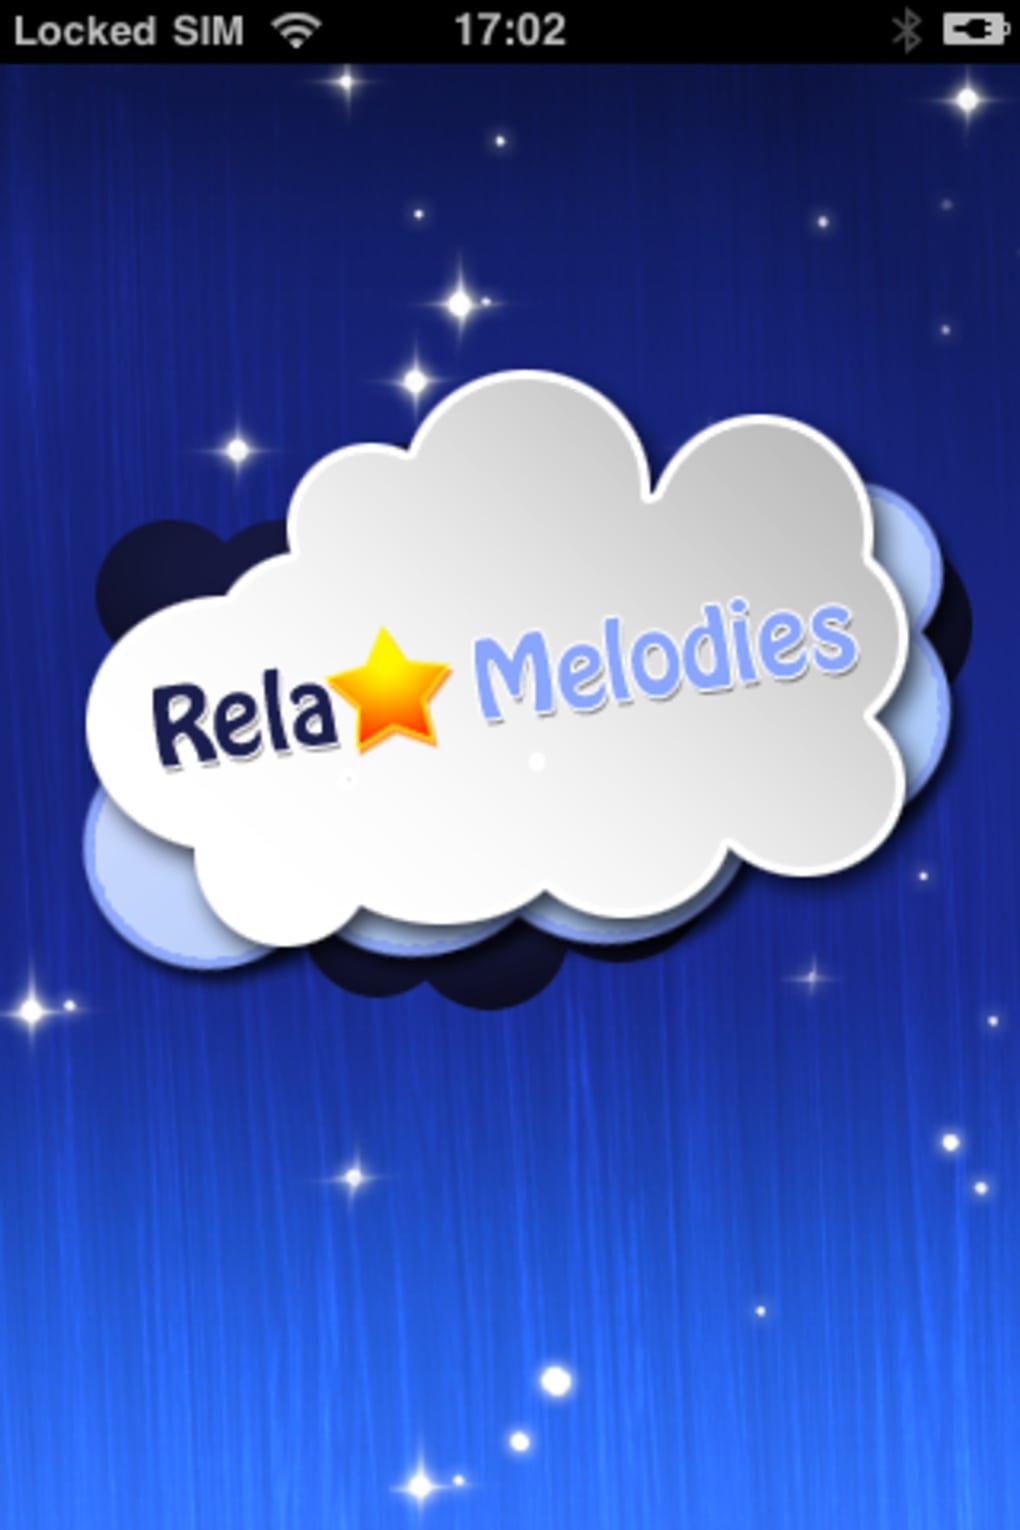 relax melodies app for iphone